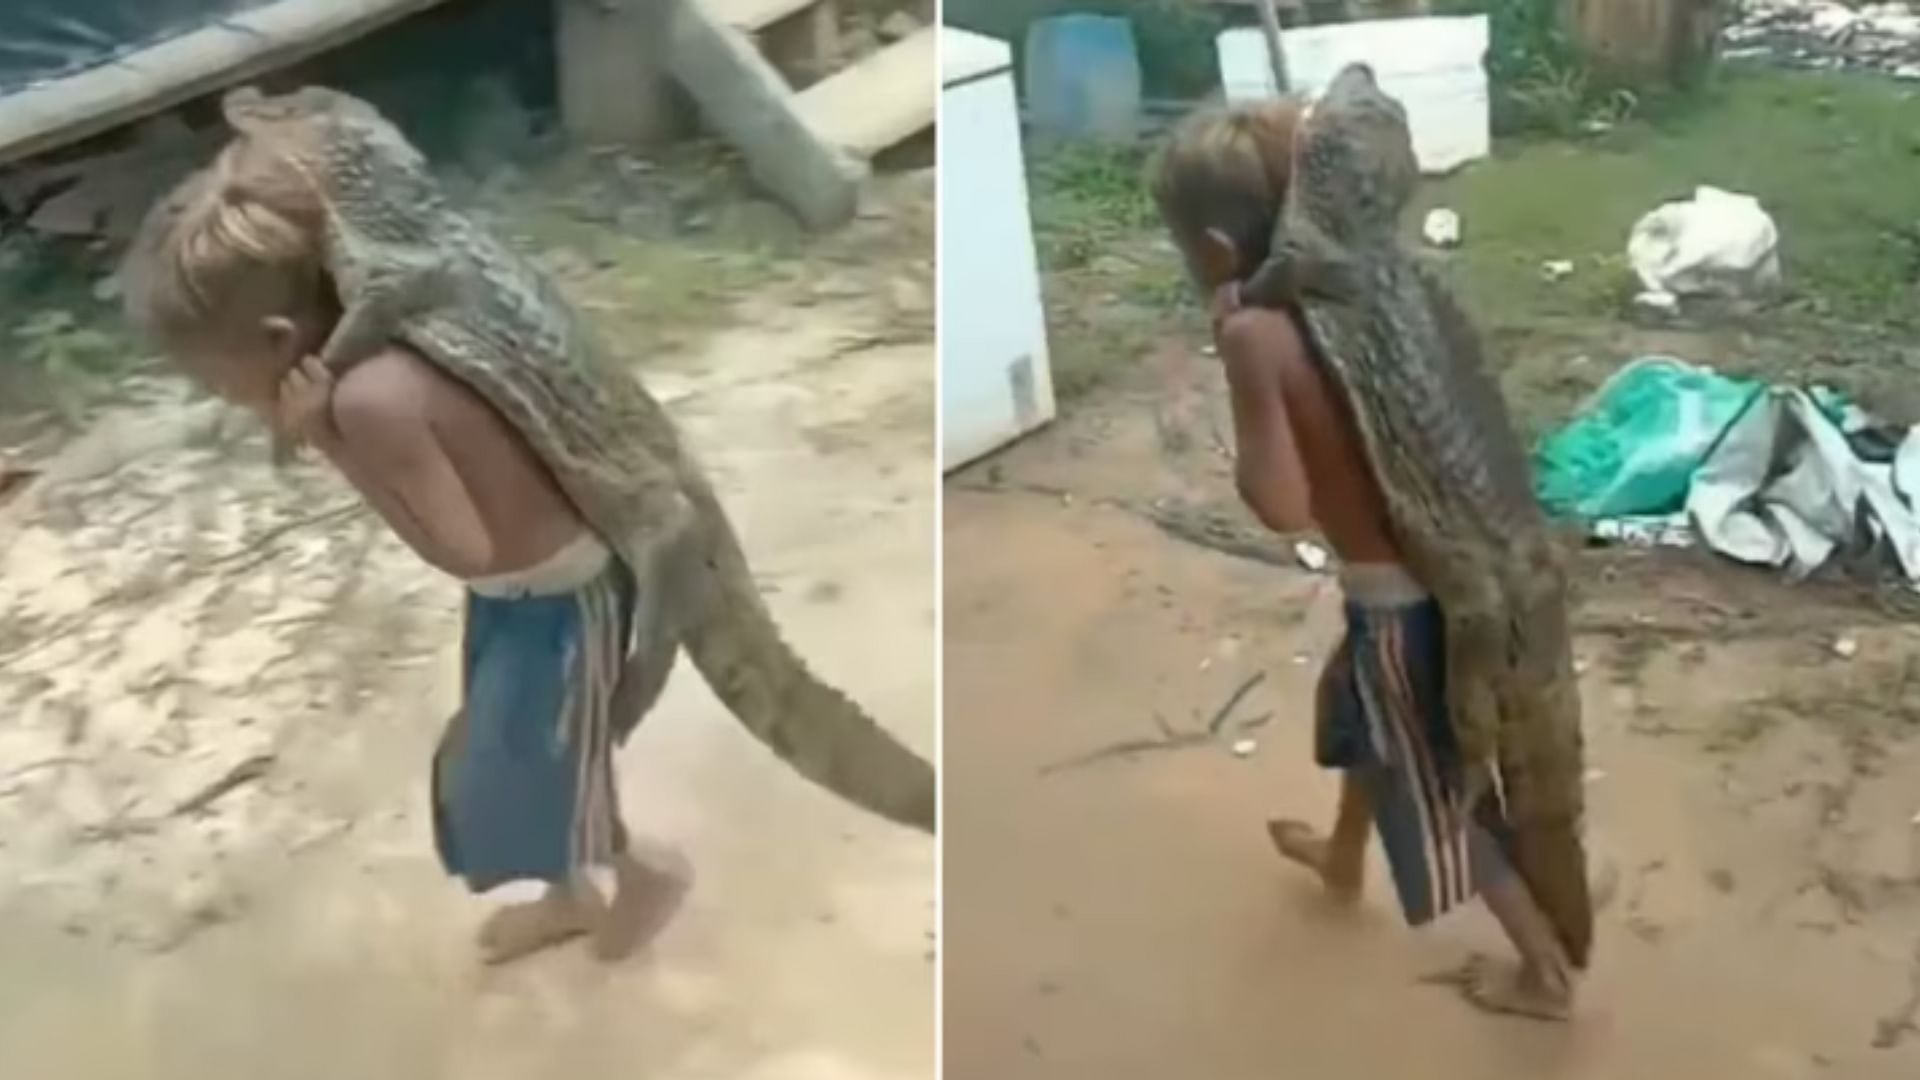 Crocodile Video Boy carrying a crocodile on his back video went viral on social media